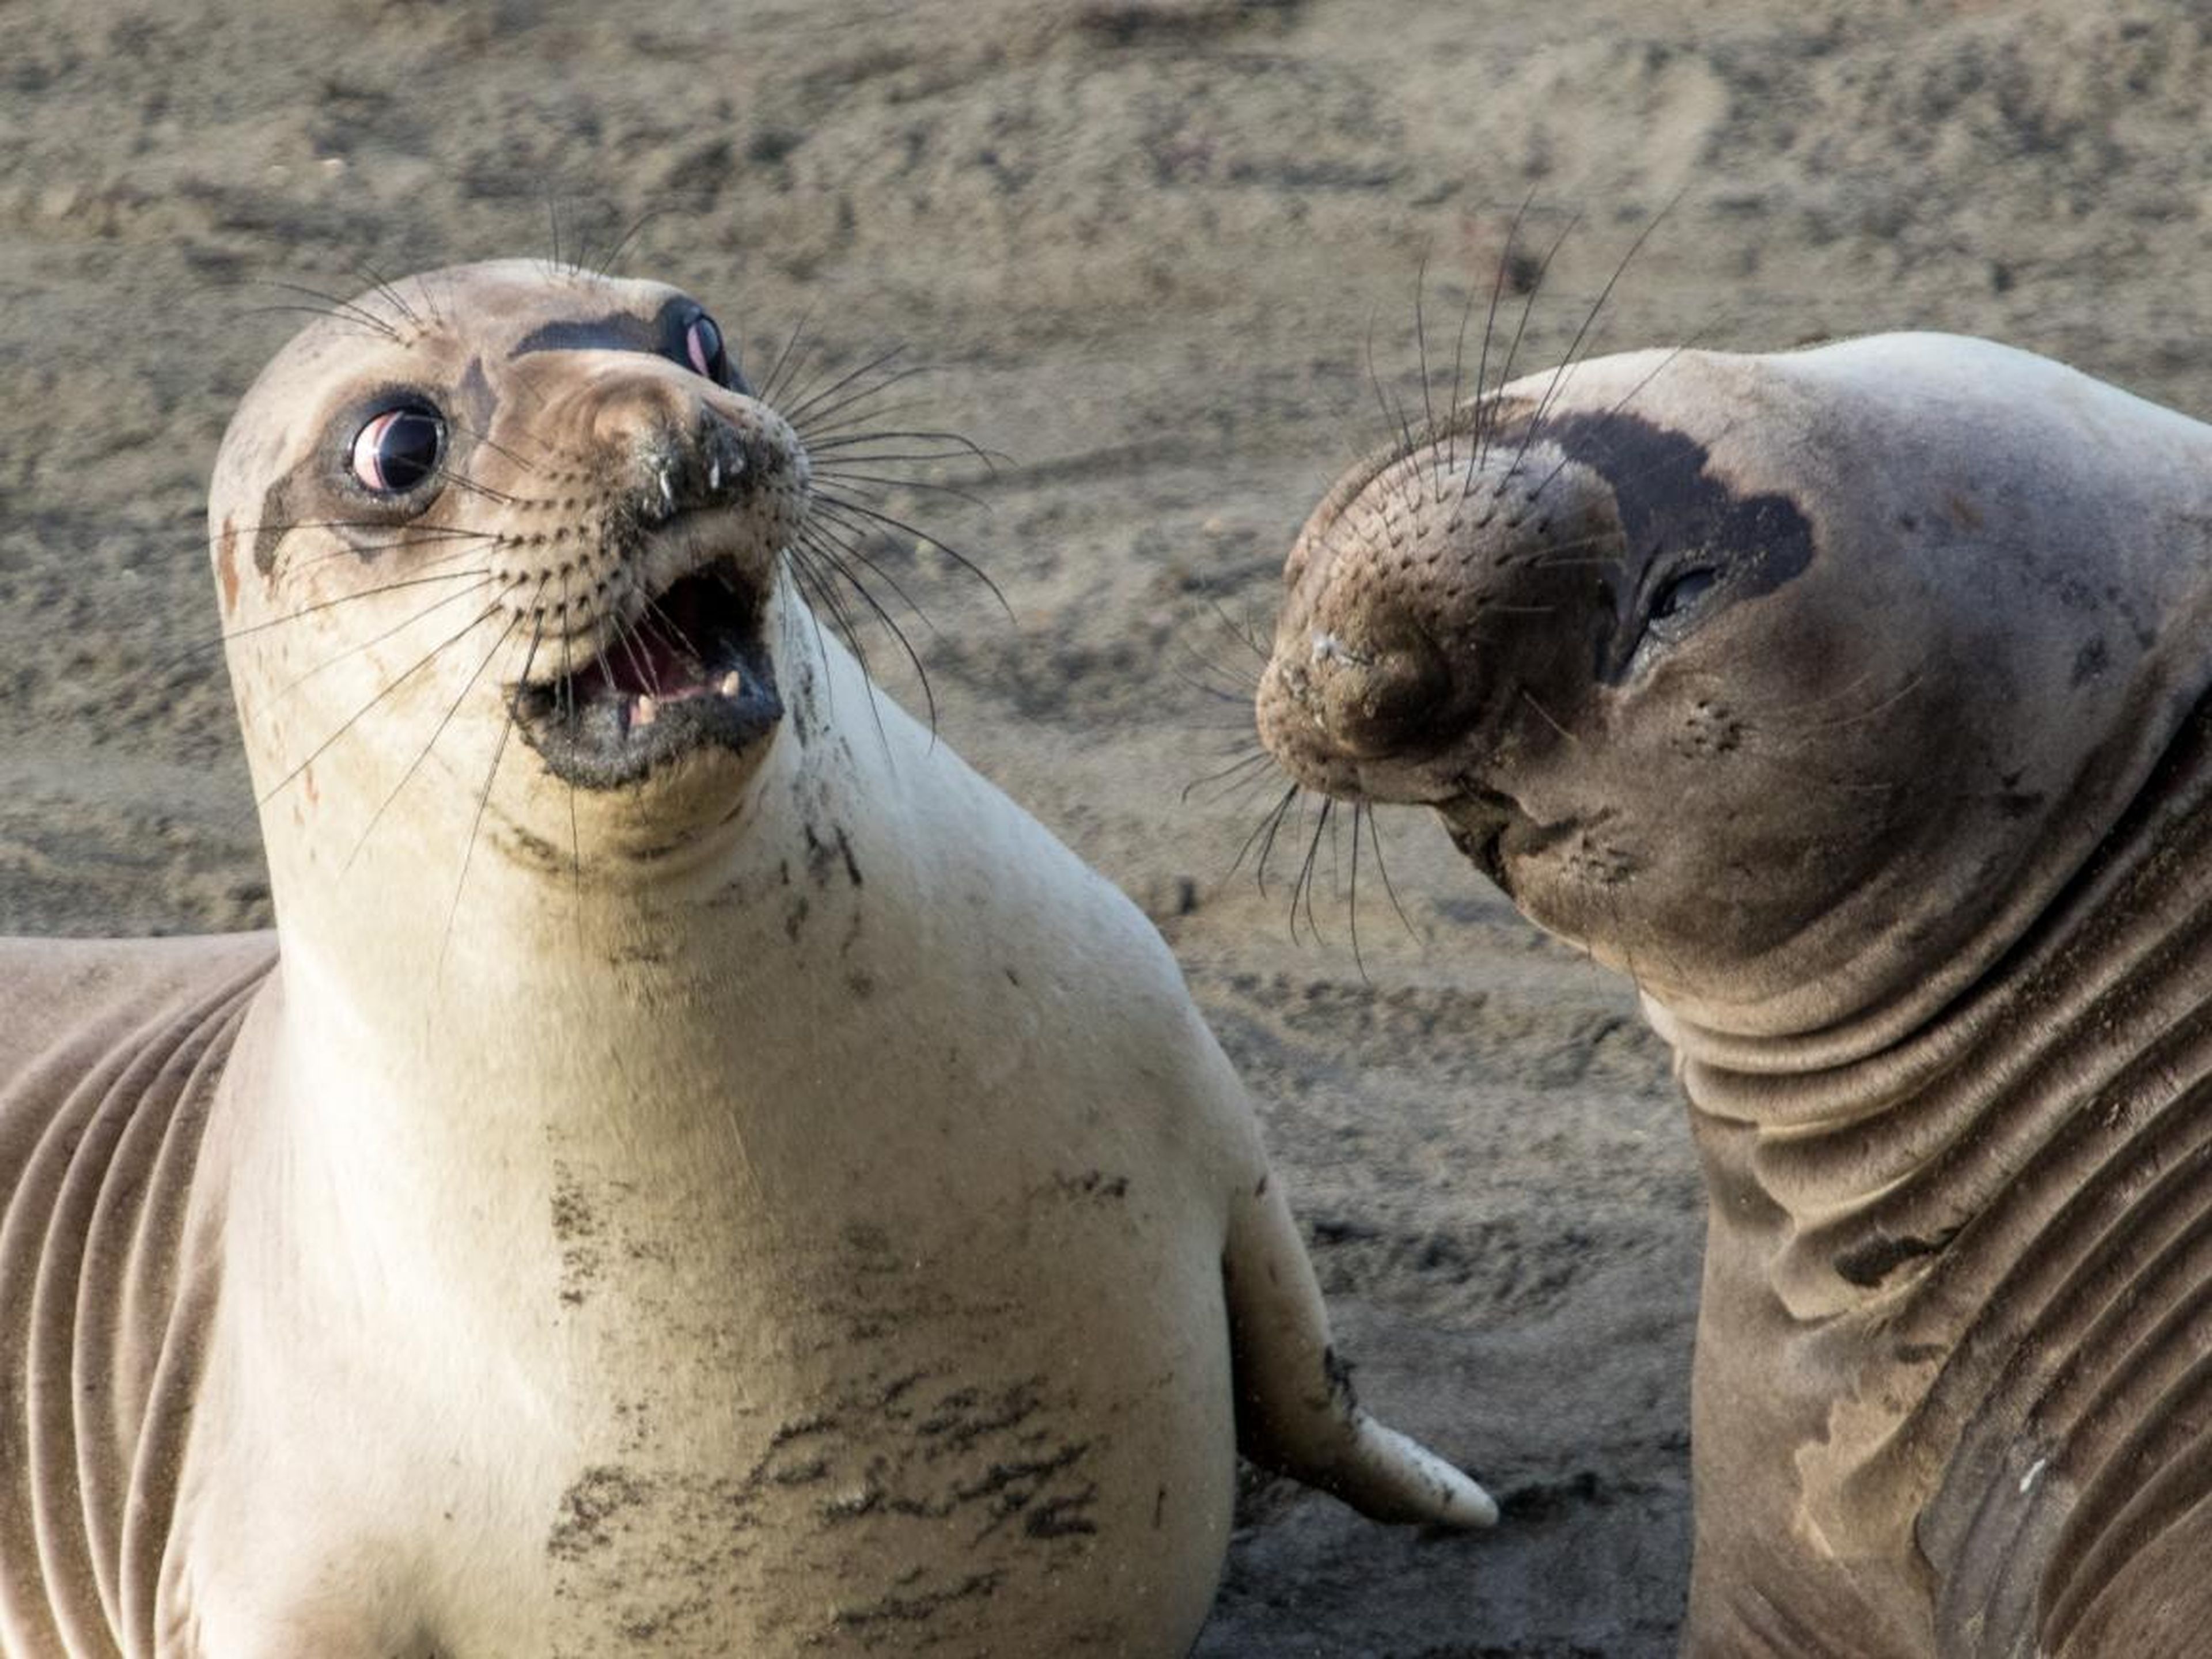 This seal has the ultimate disgusted face.